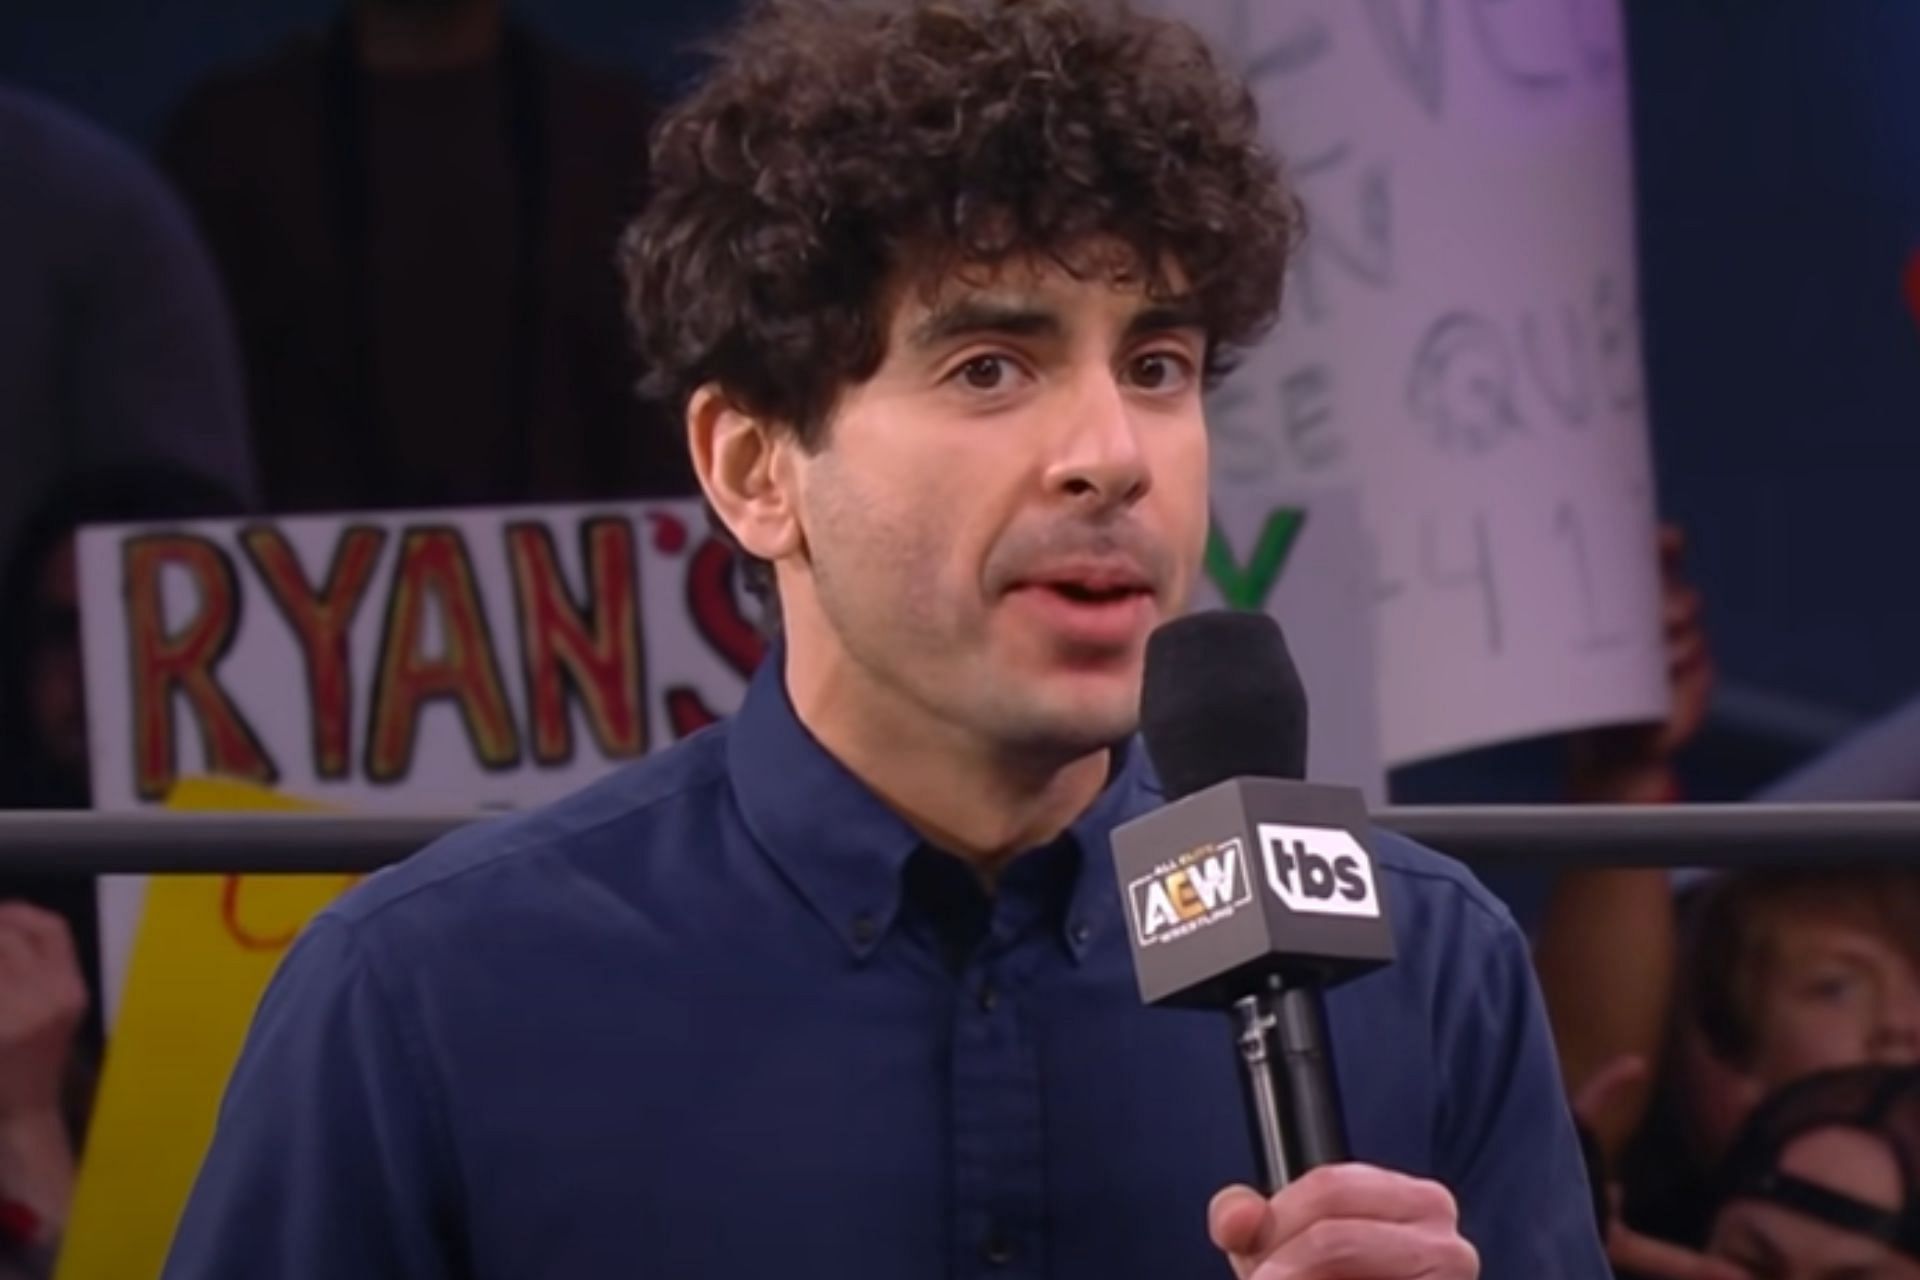 Tony Khan has been the recipient of some apologies [Image Source:AEW YouTube]